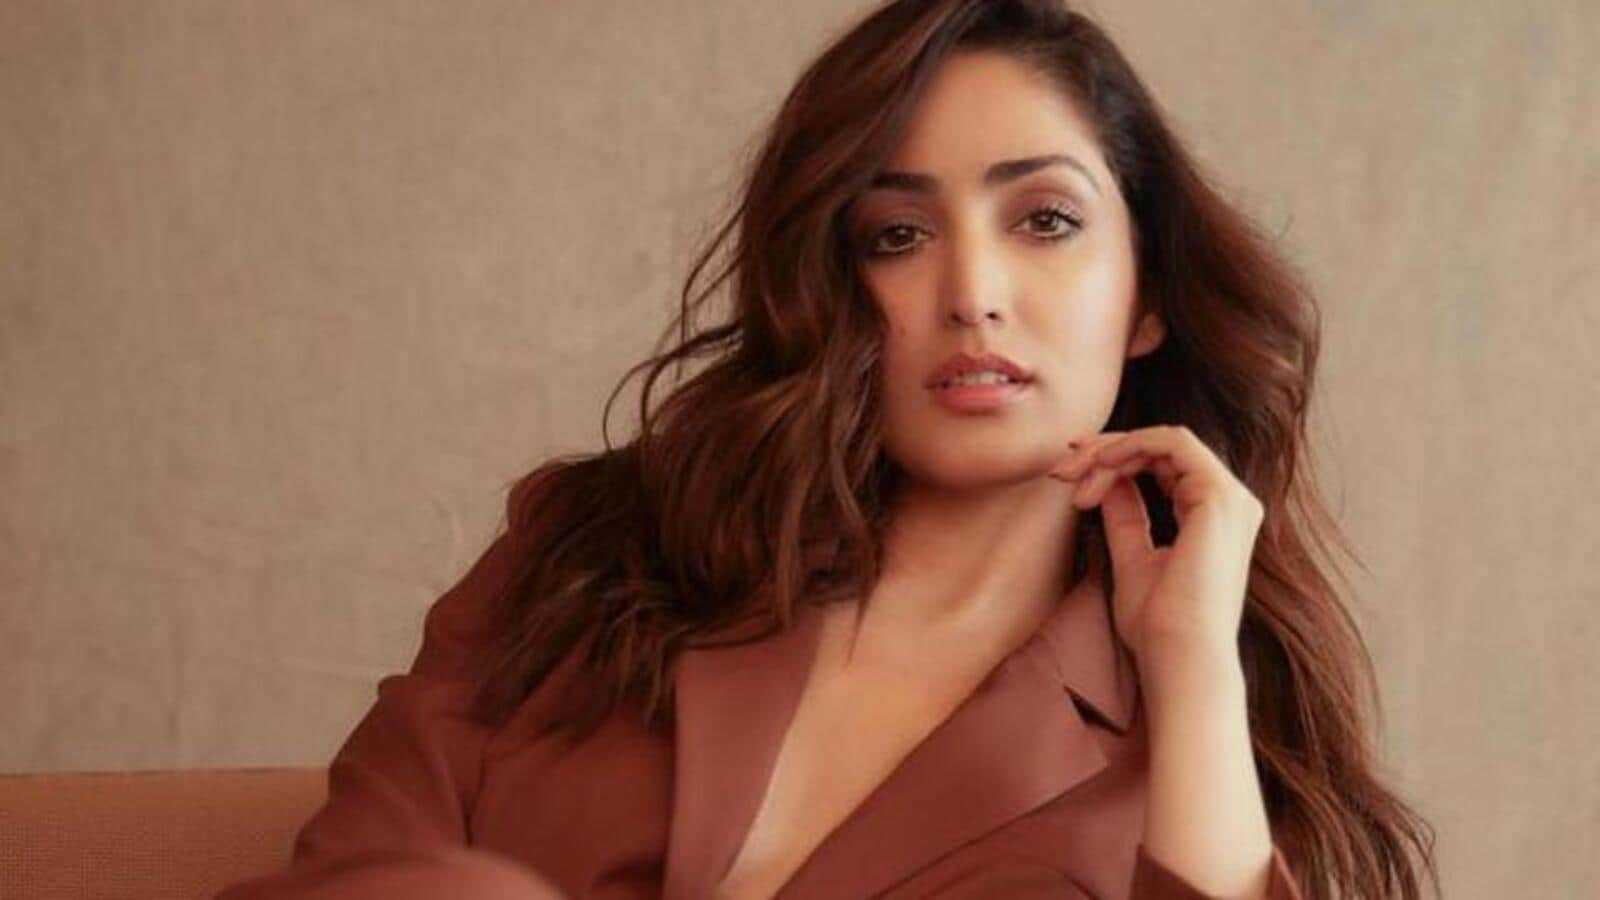 Yami Gautam’s official Instagram account could be hacked; actress informs her fans